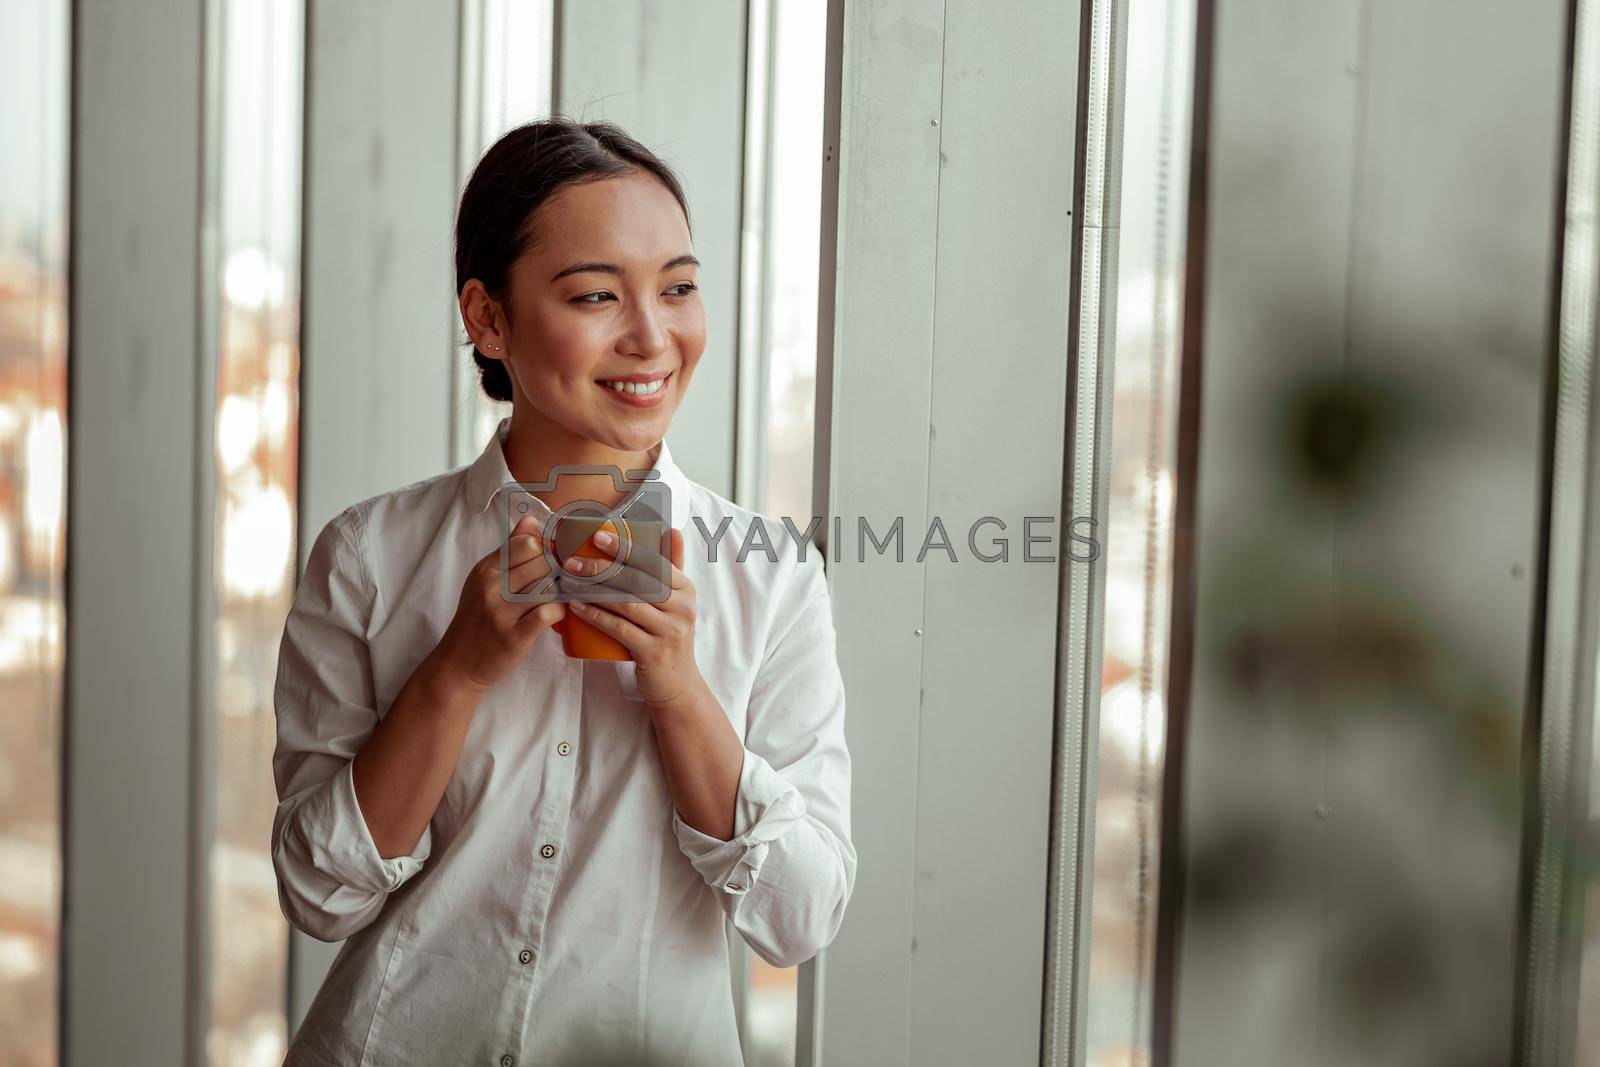 Royalty free image of Smiling asian business woman drinking coffee standing near window at office by Yaroslav_astakhov